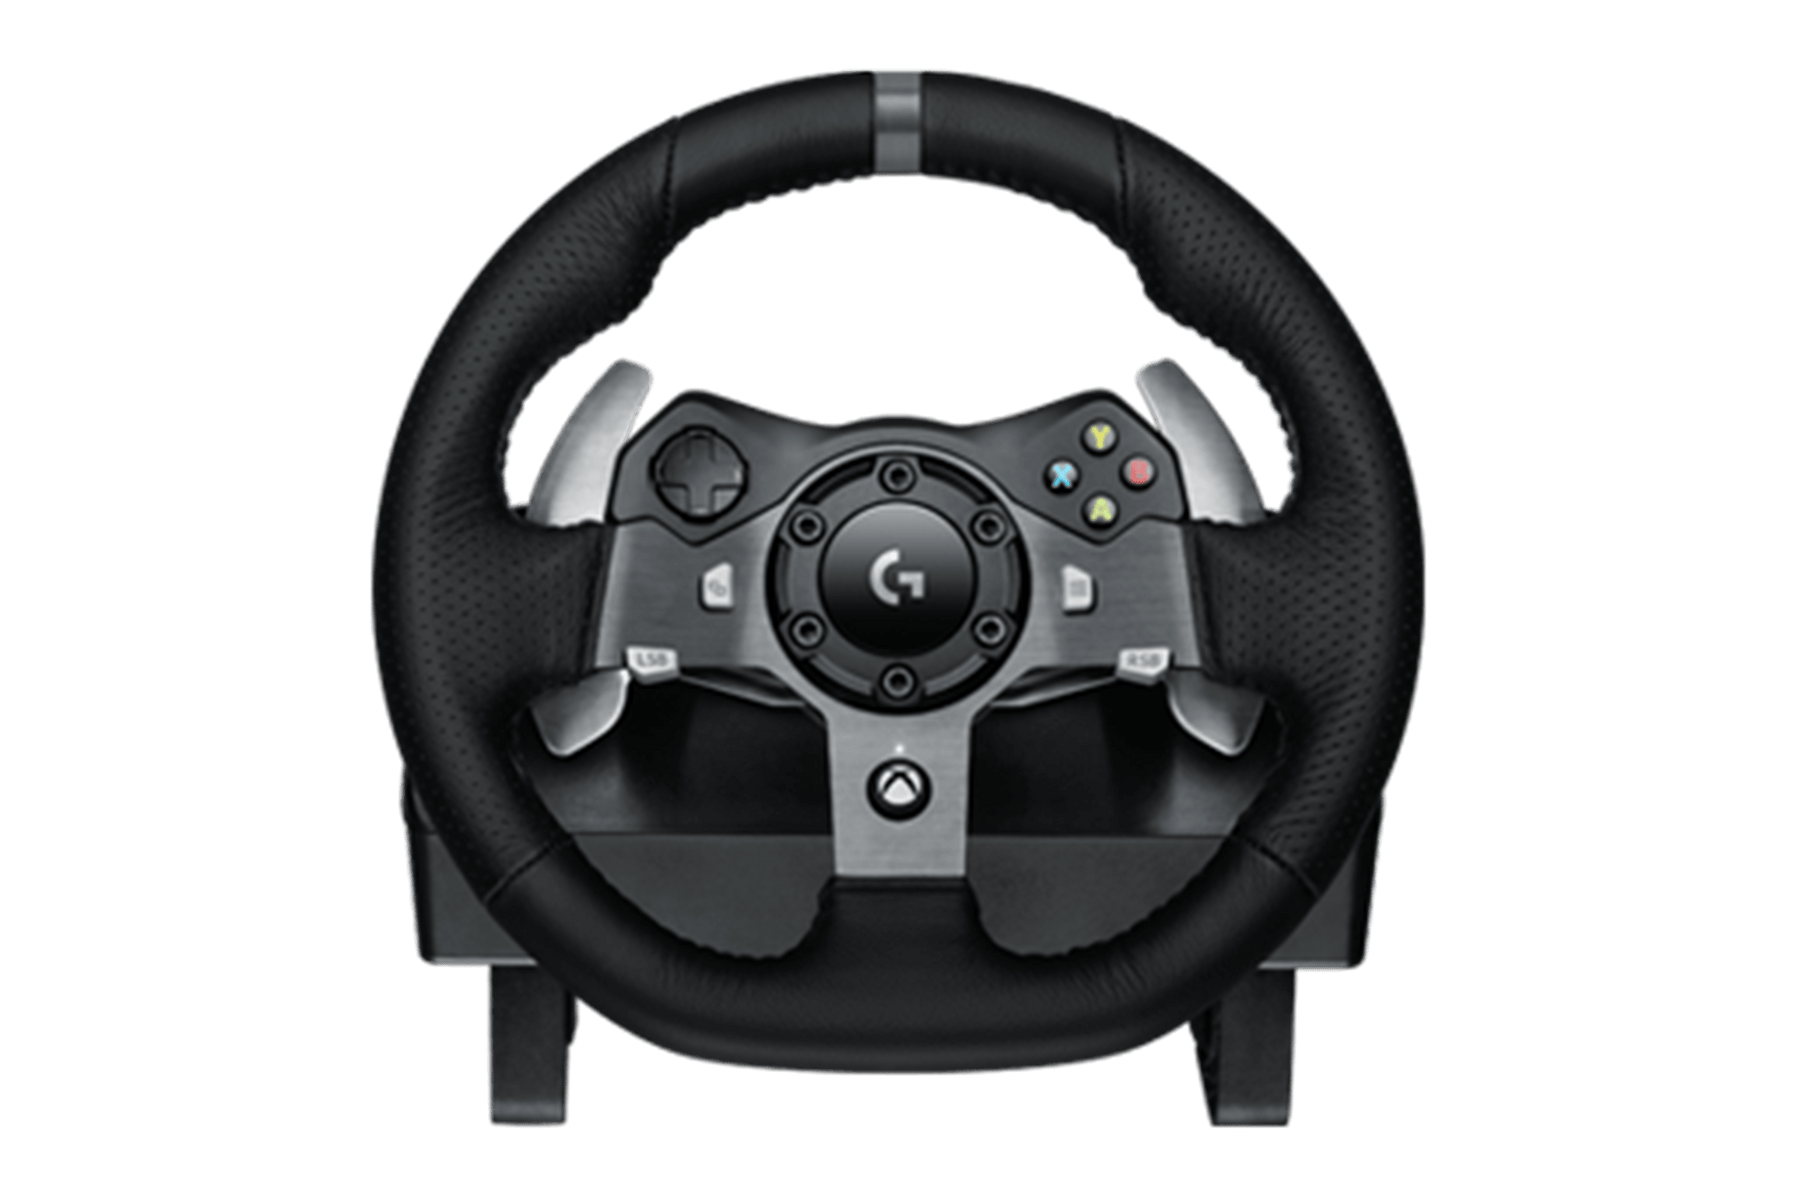 G920 Driving Wheel For Xbox One And PC – Trak Racer